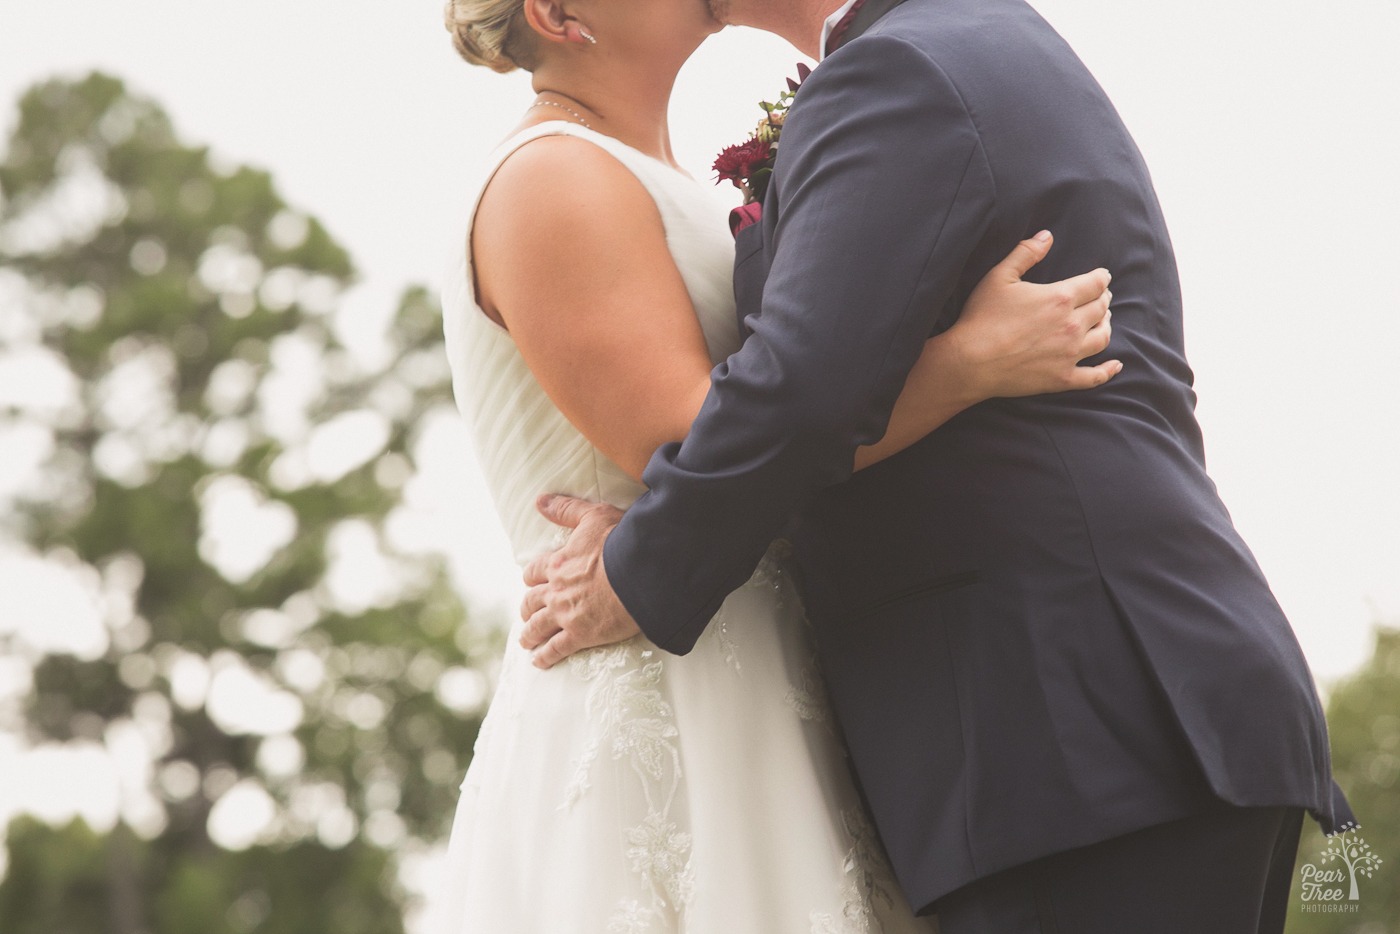 Anonymous bride and groom kissing with hands stretching around each other's waists